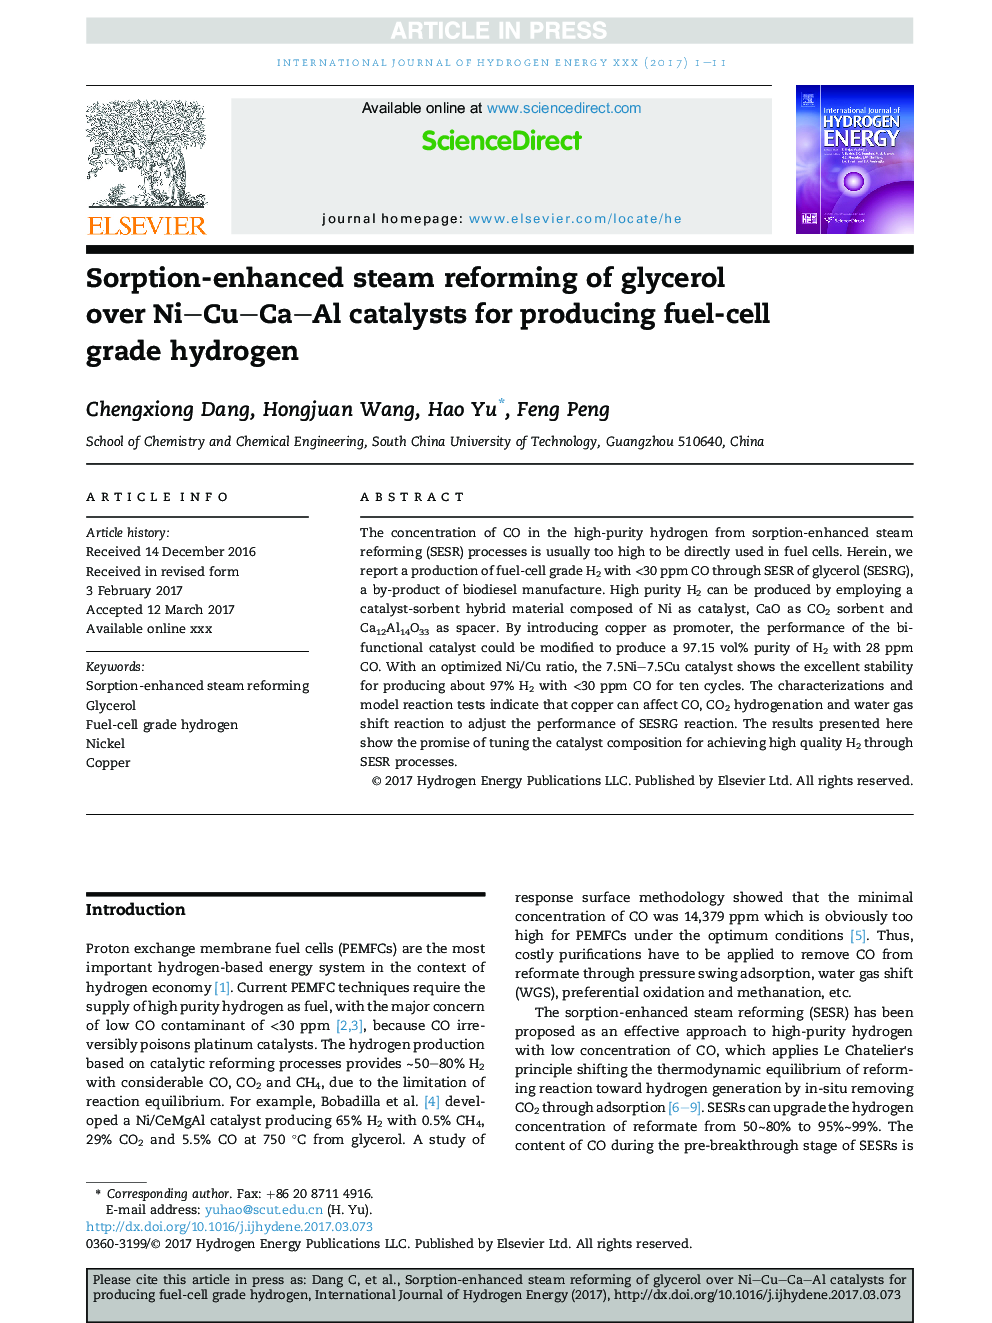 Sorption-enhanced steam reforming of glycerol over NiCuCaAl catalysts for producing fuel-cell grade hydrogen